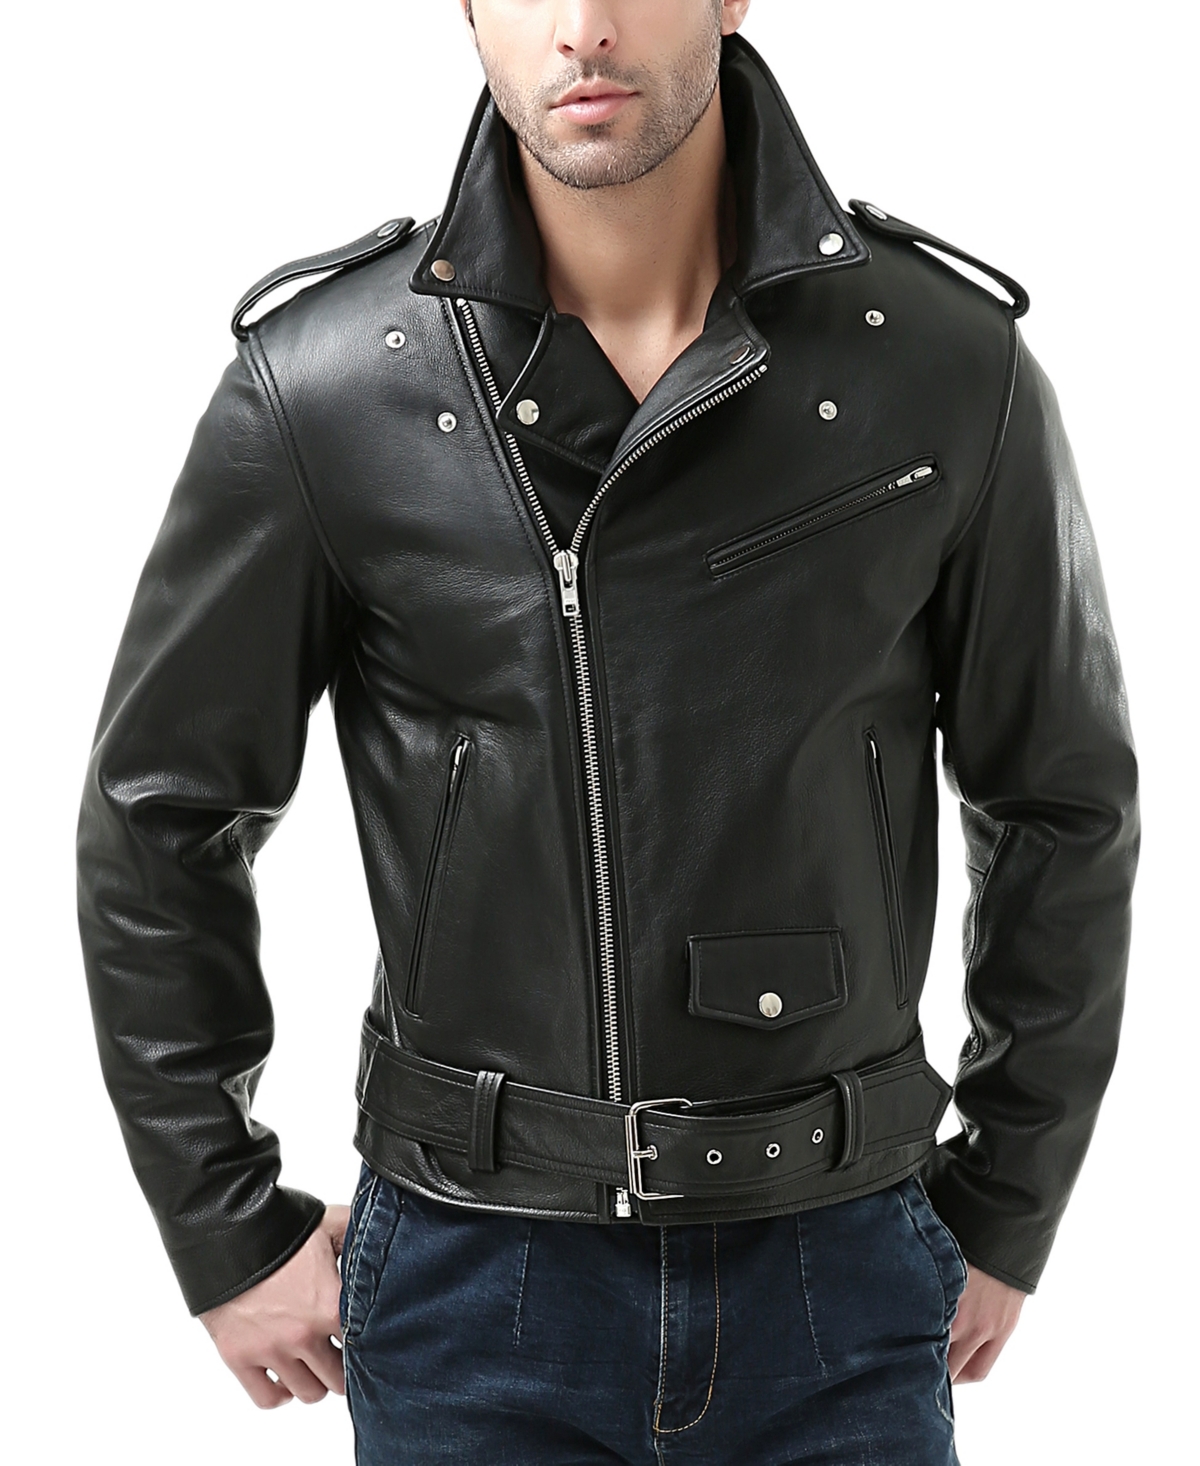 Men Classic Leather Motorcycle Jacket - Big and Tall - Black